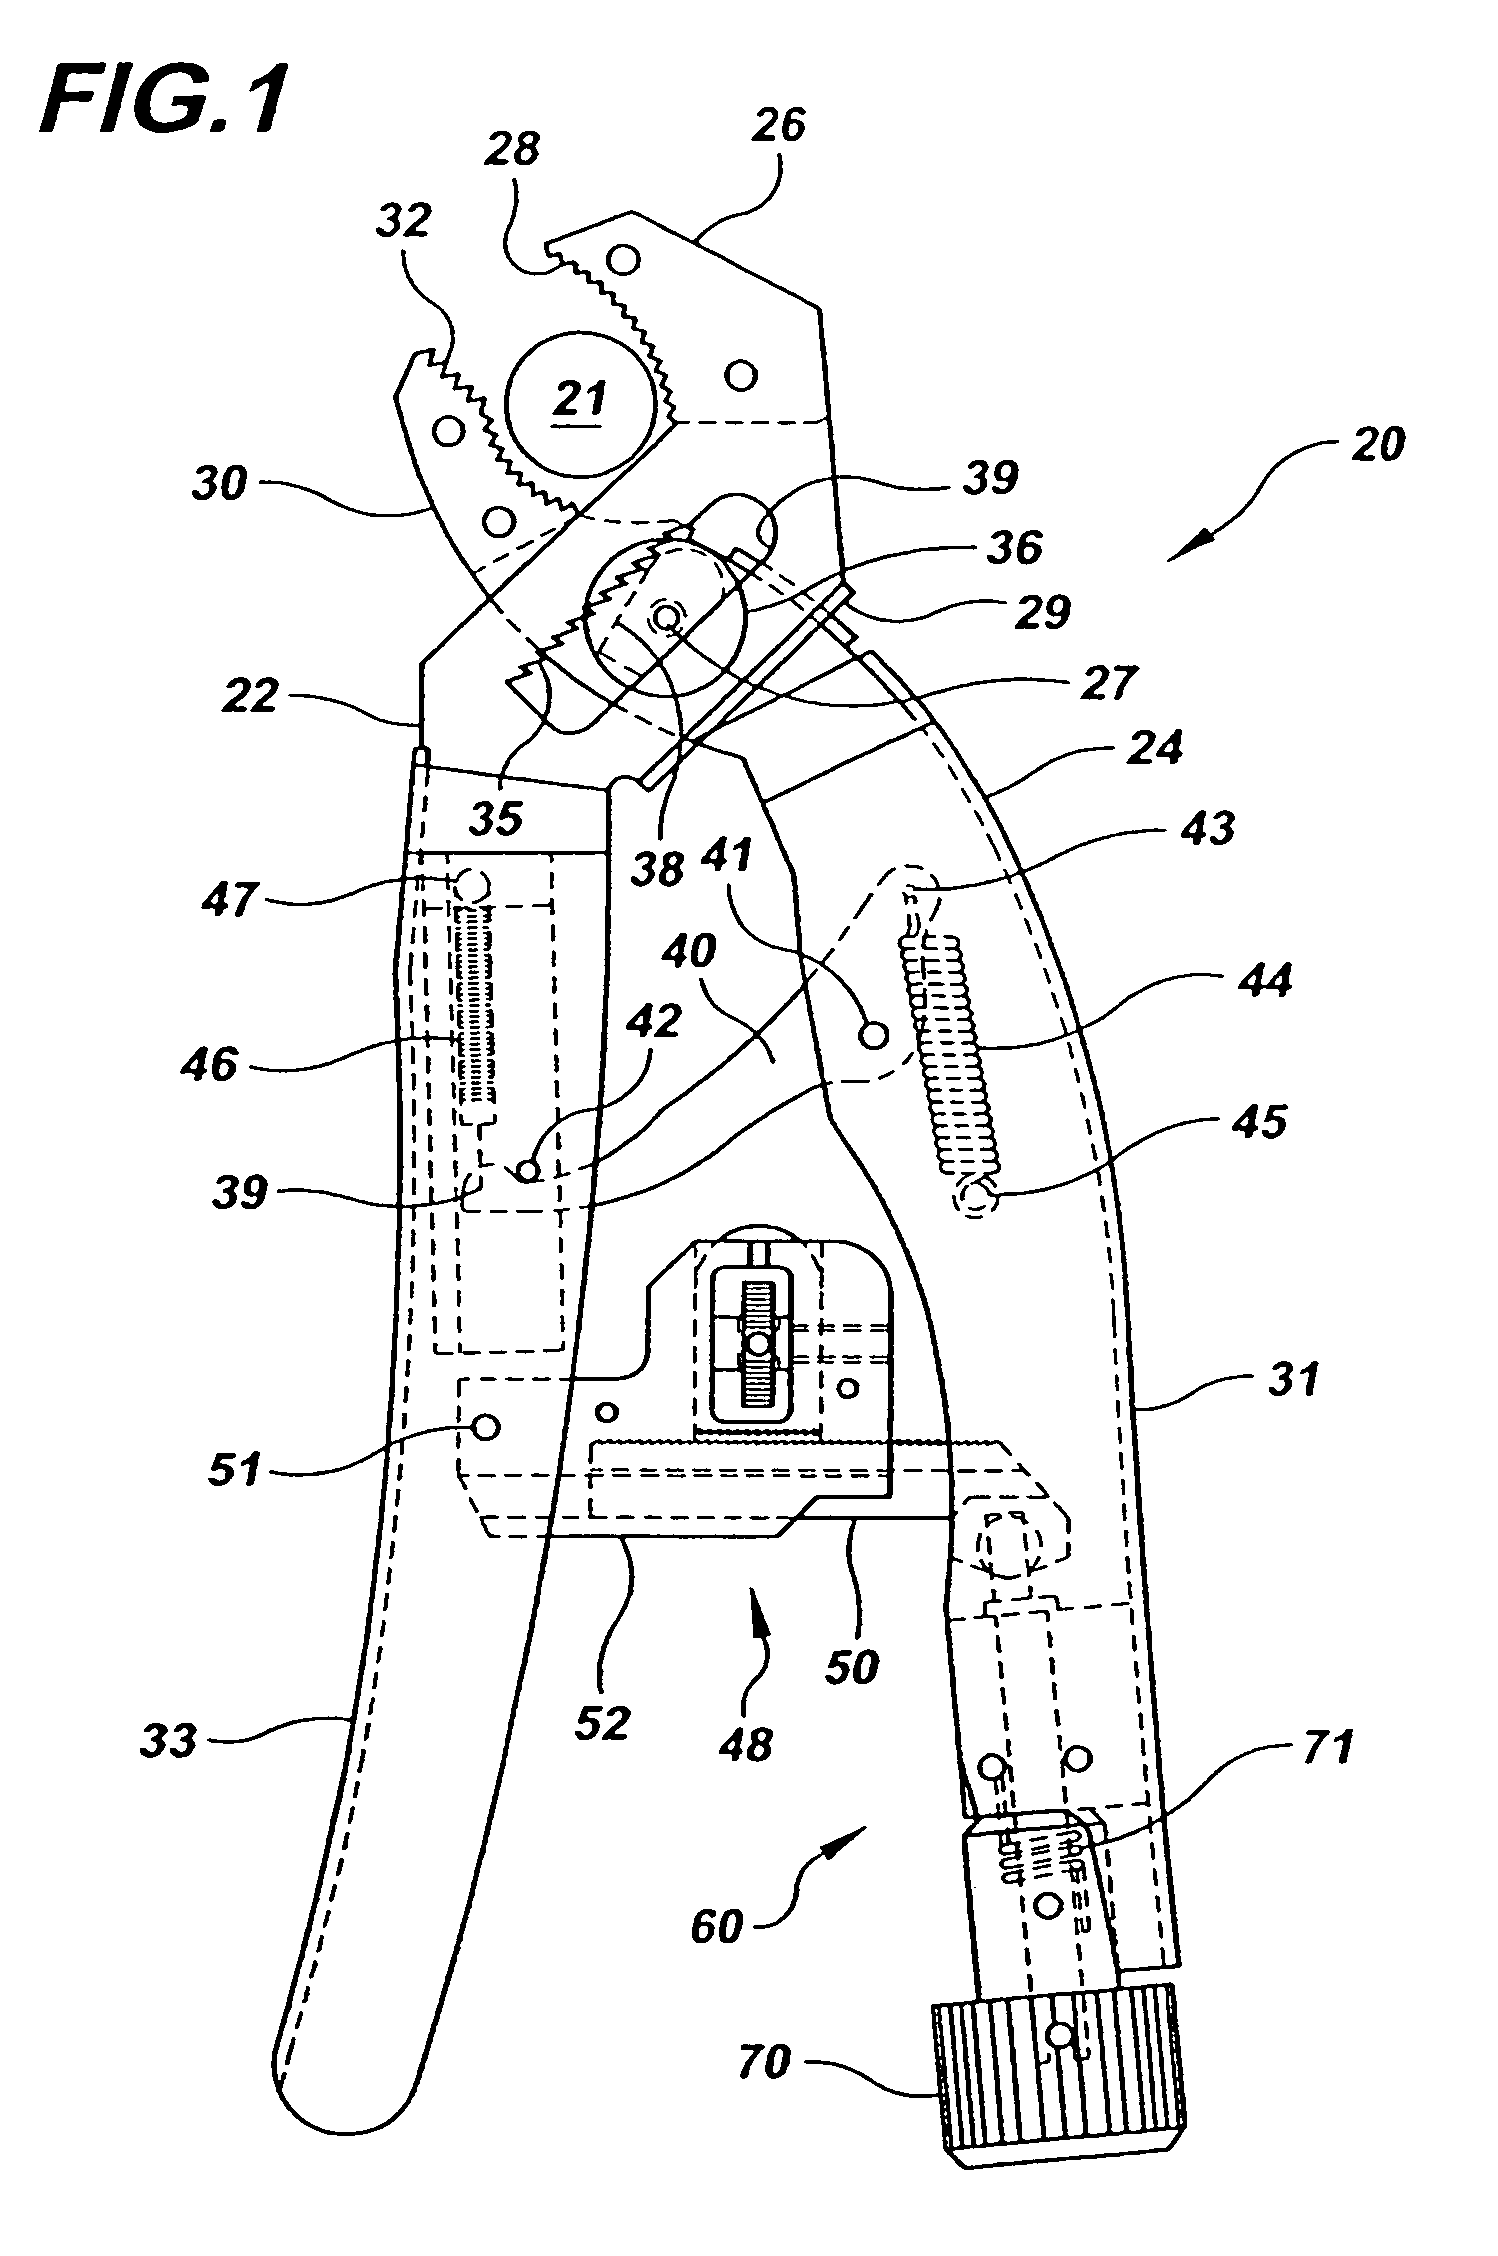 Self-adjusting, locking pliers with gripping force adjustment